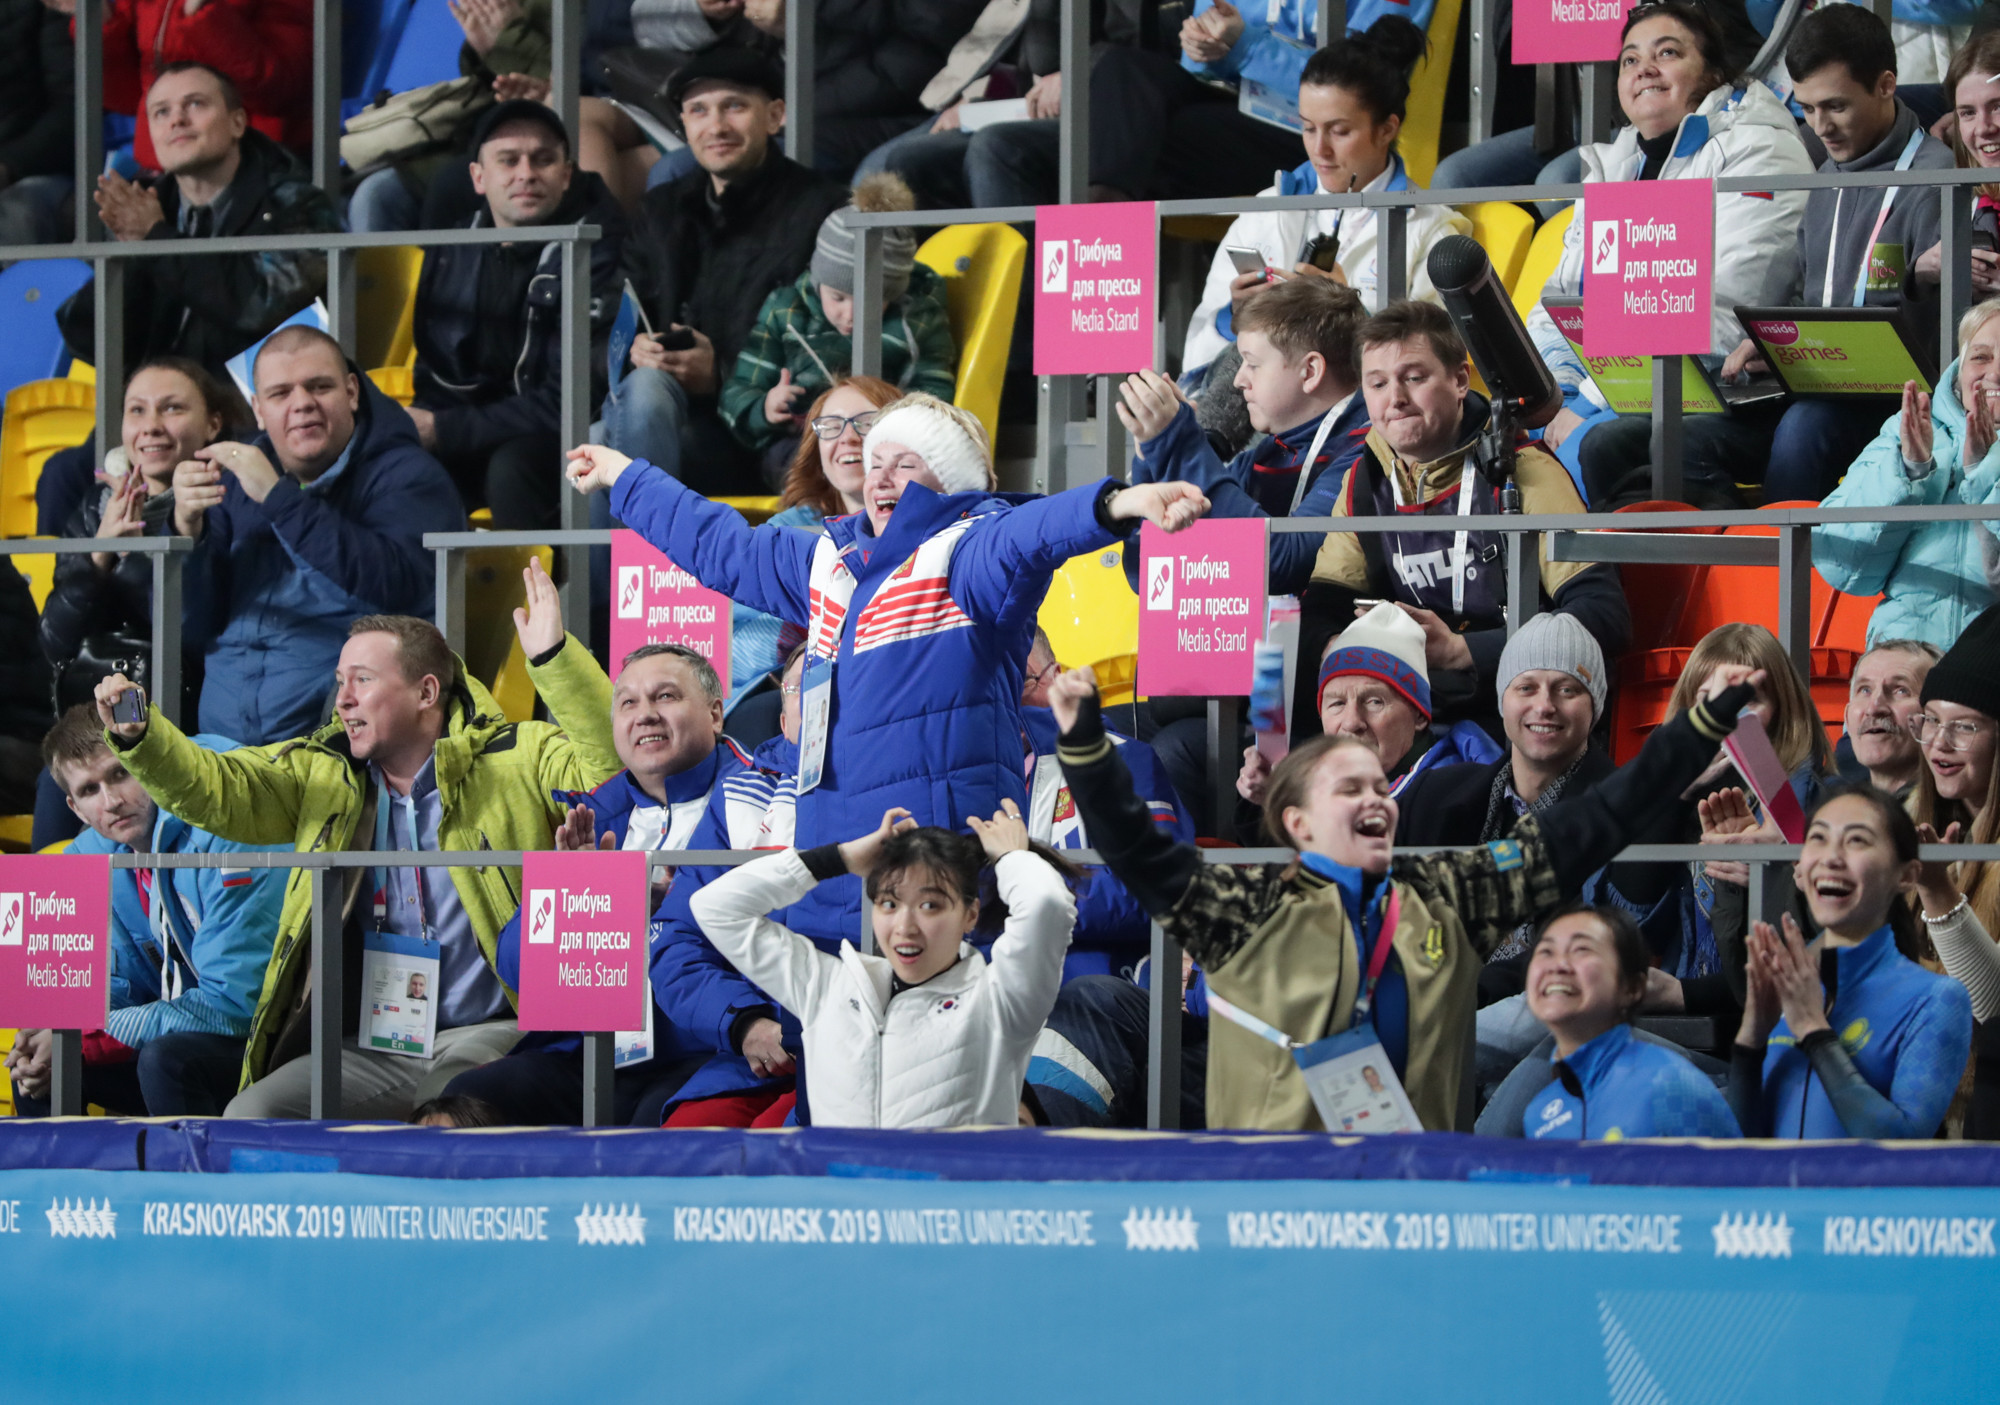 The South Koreans reacted in disbelief, while the Russian and Kazakh teams celebrated ©Krasnoyarsk 2019